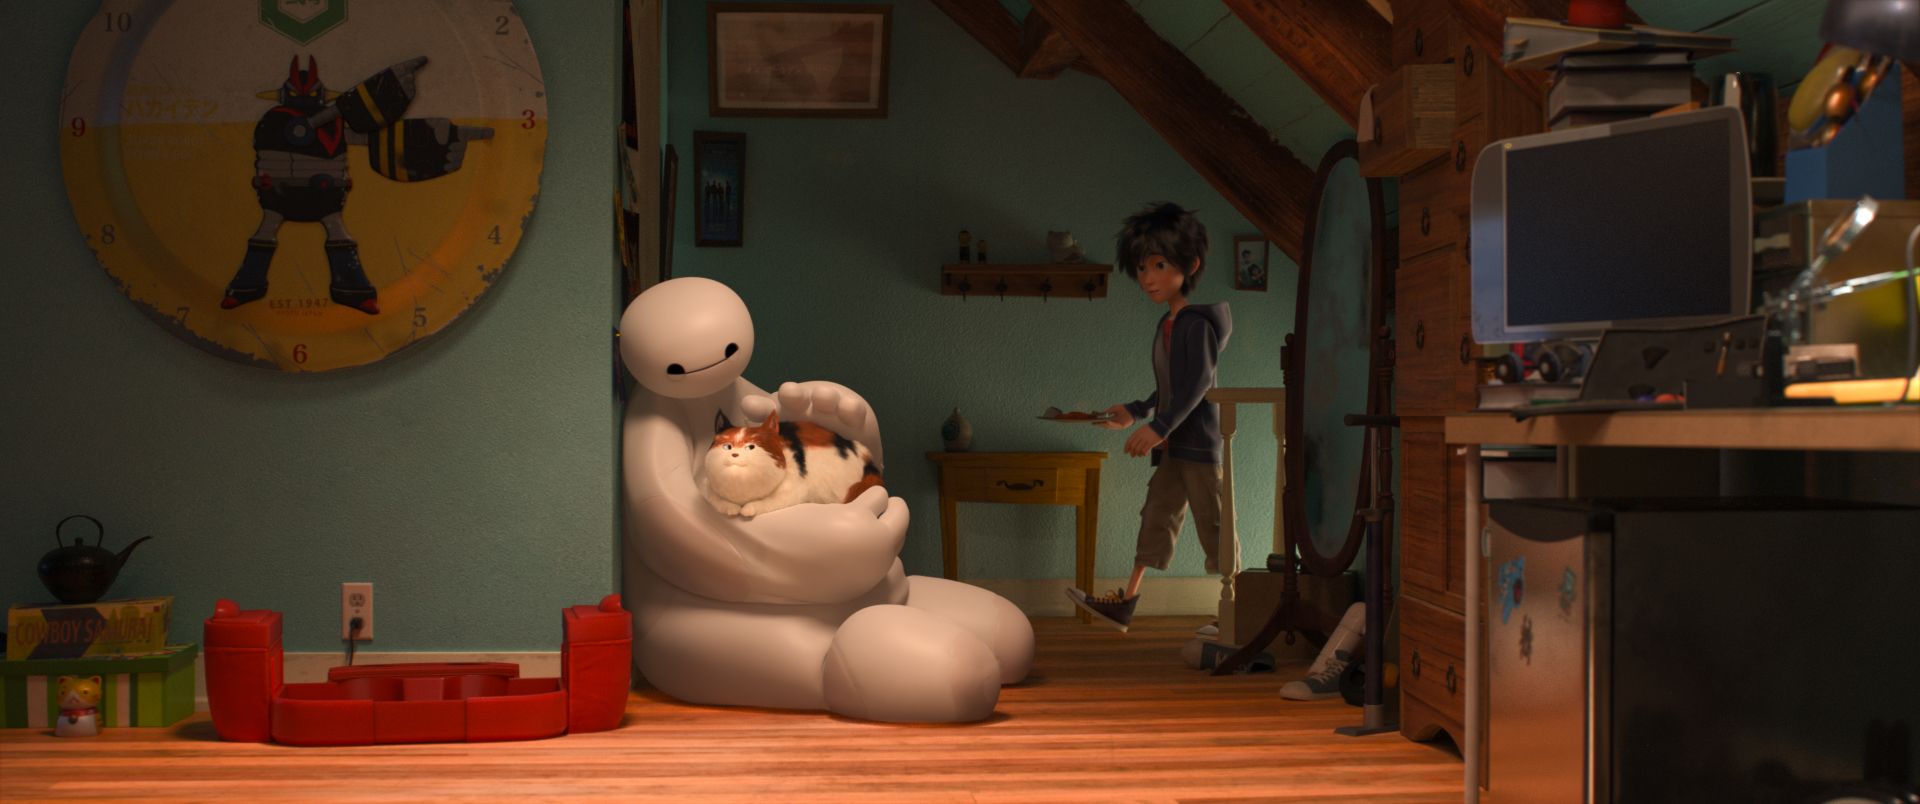 The lovable Baymax stroking a cat